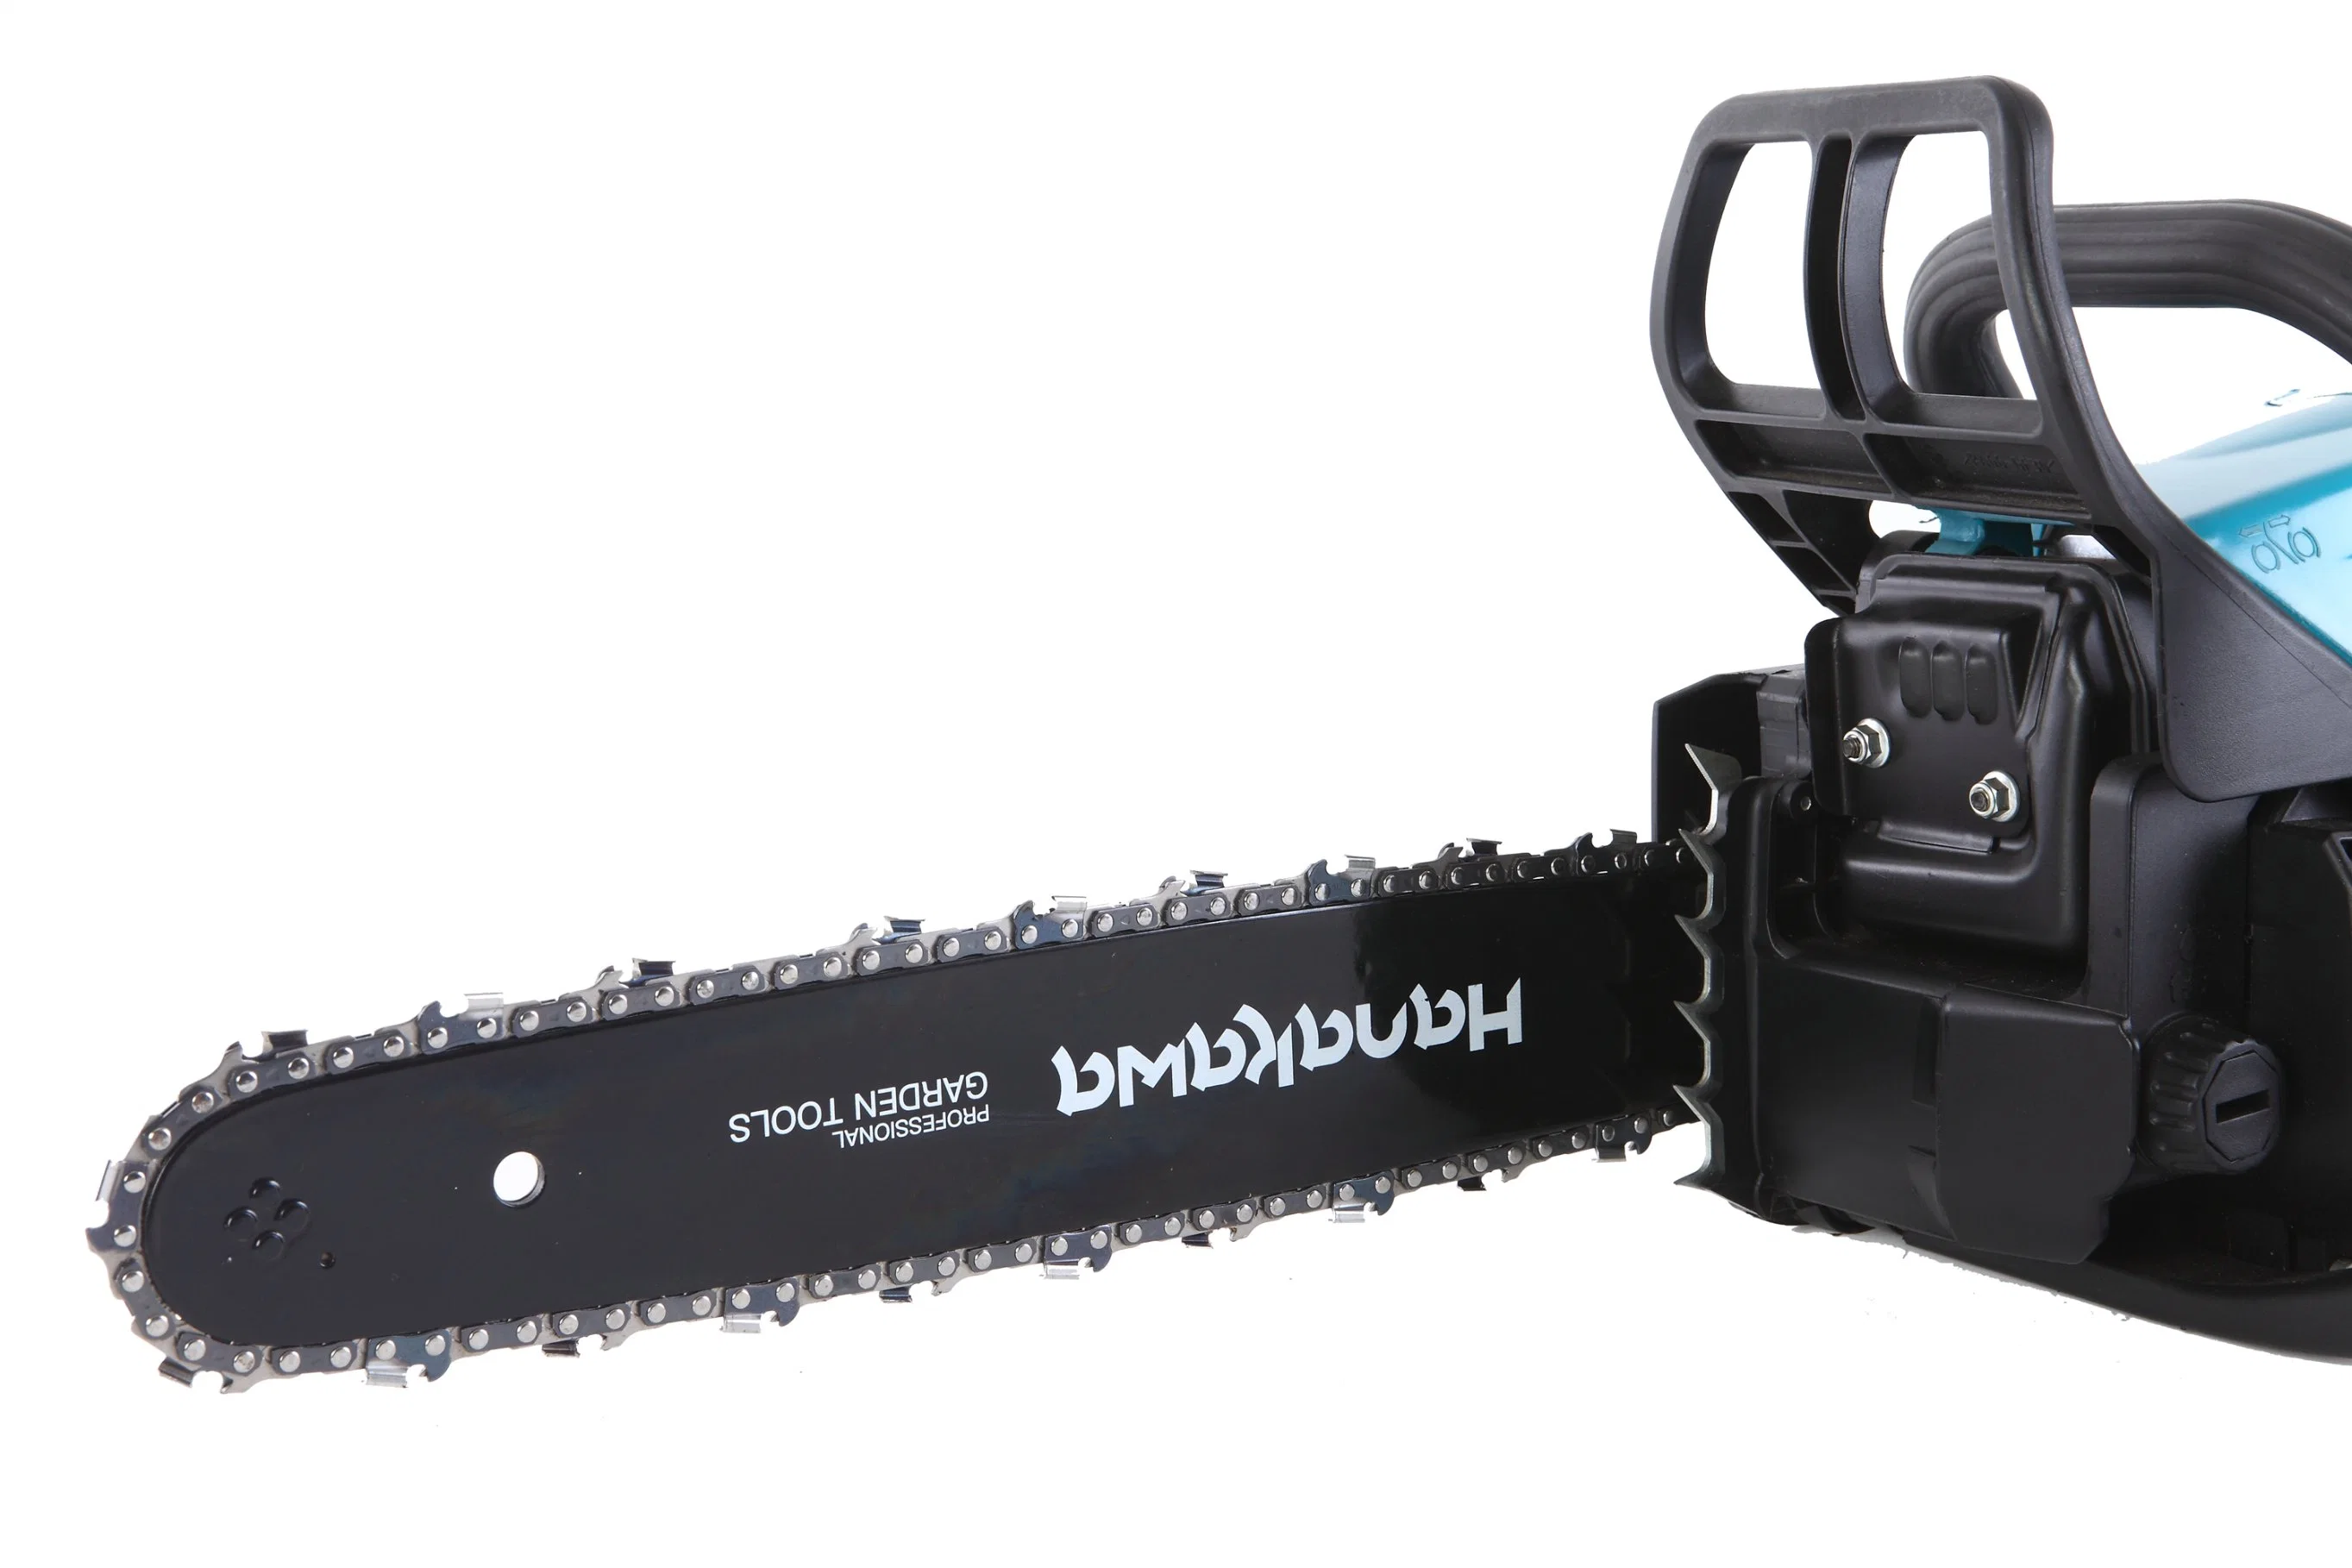 Hanakawa H940 (230) Gas Chainsaw-16inch 18inch Bar Gasoline-Power Chain Saws 2-Cycle Automatic Chain Oiler Garden Tool for Trees Cutting Outdoor Home Farm Use